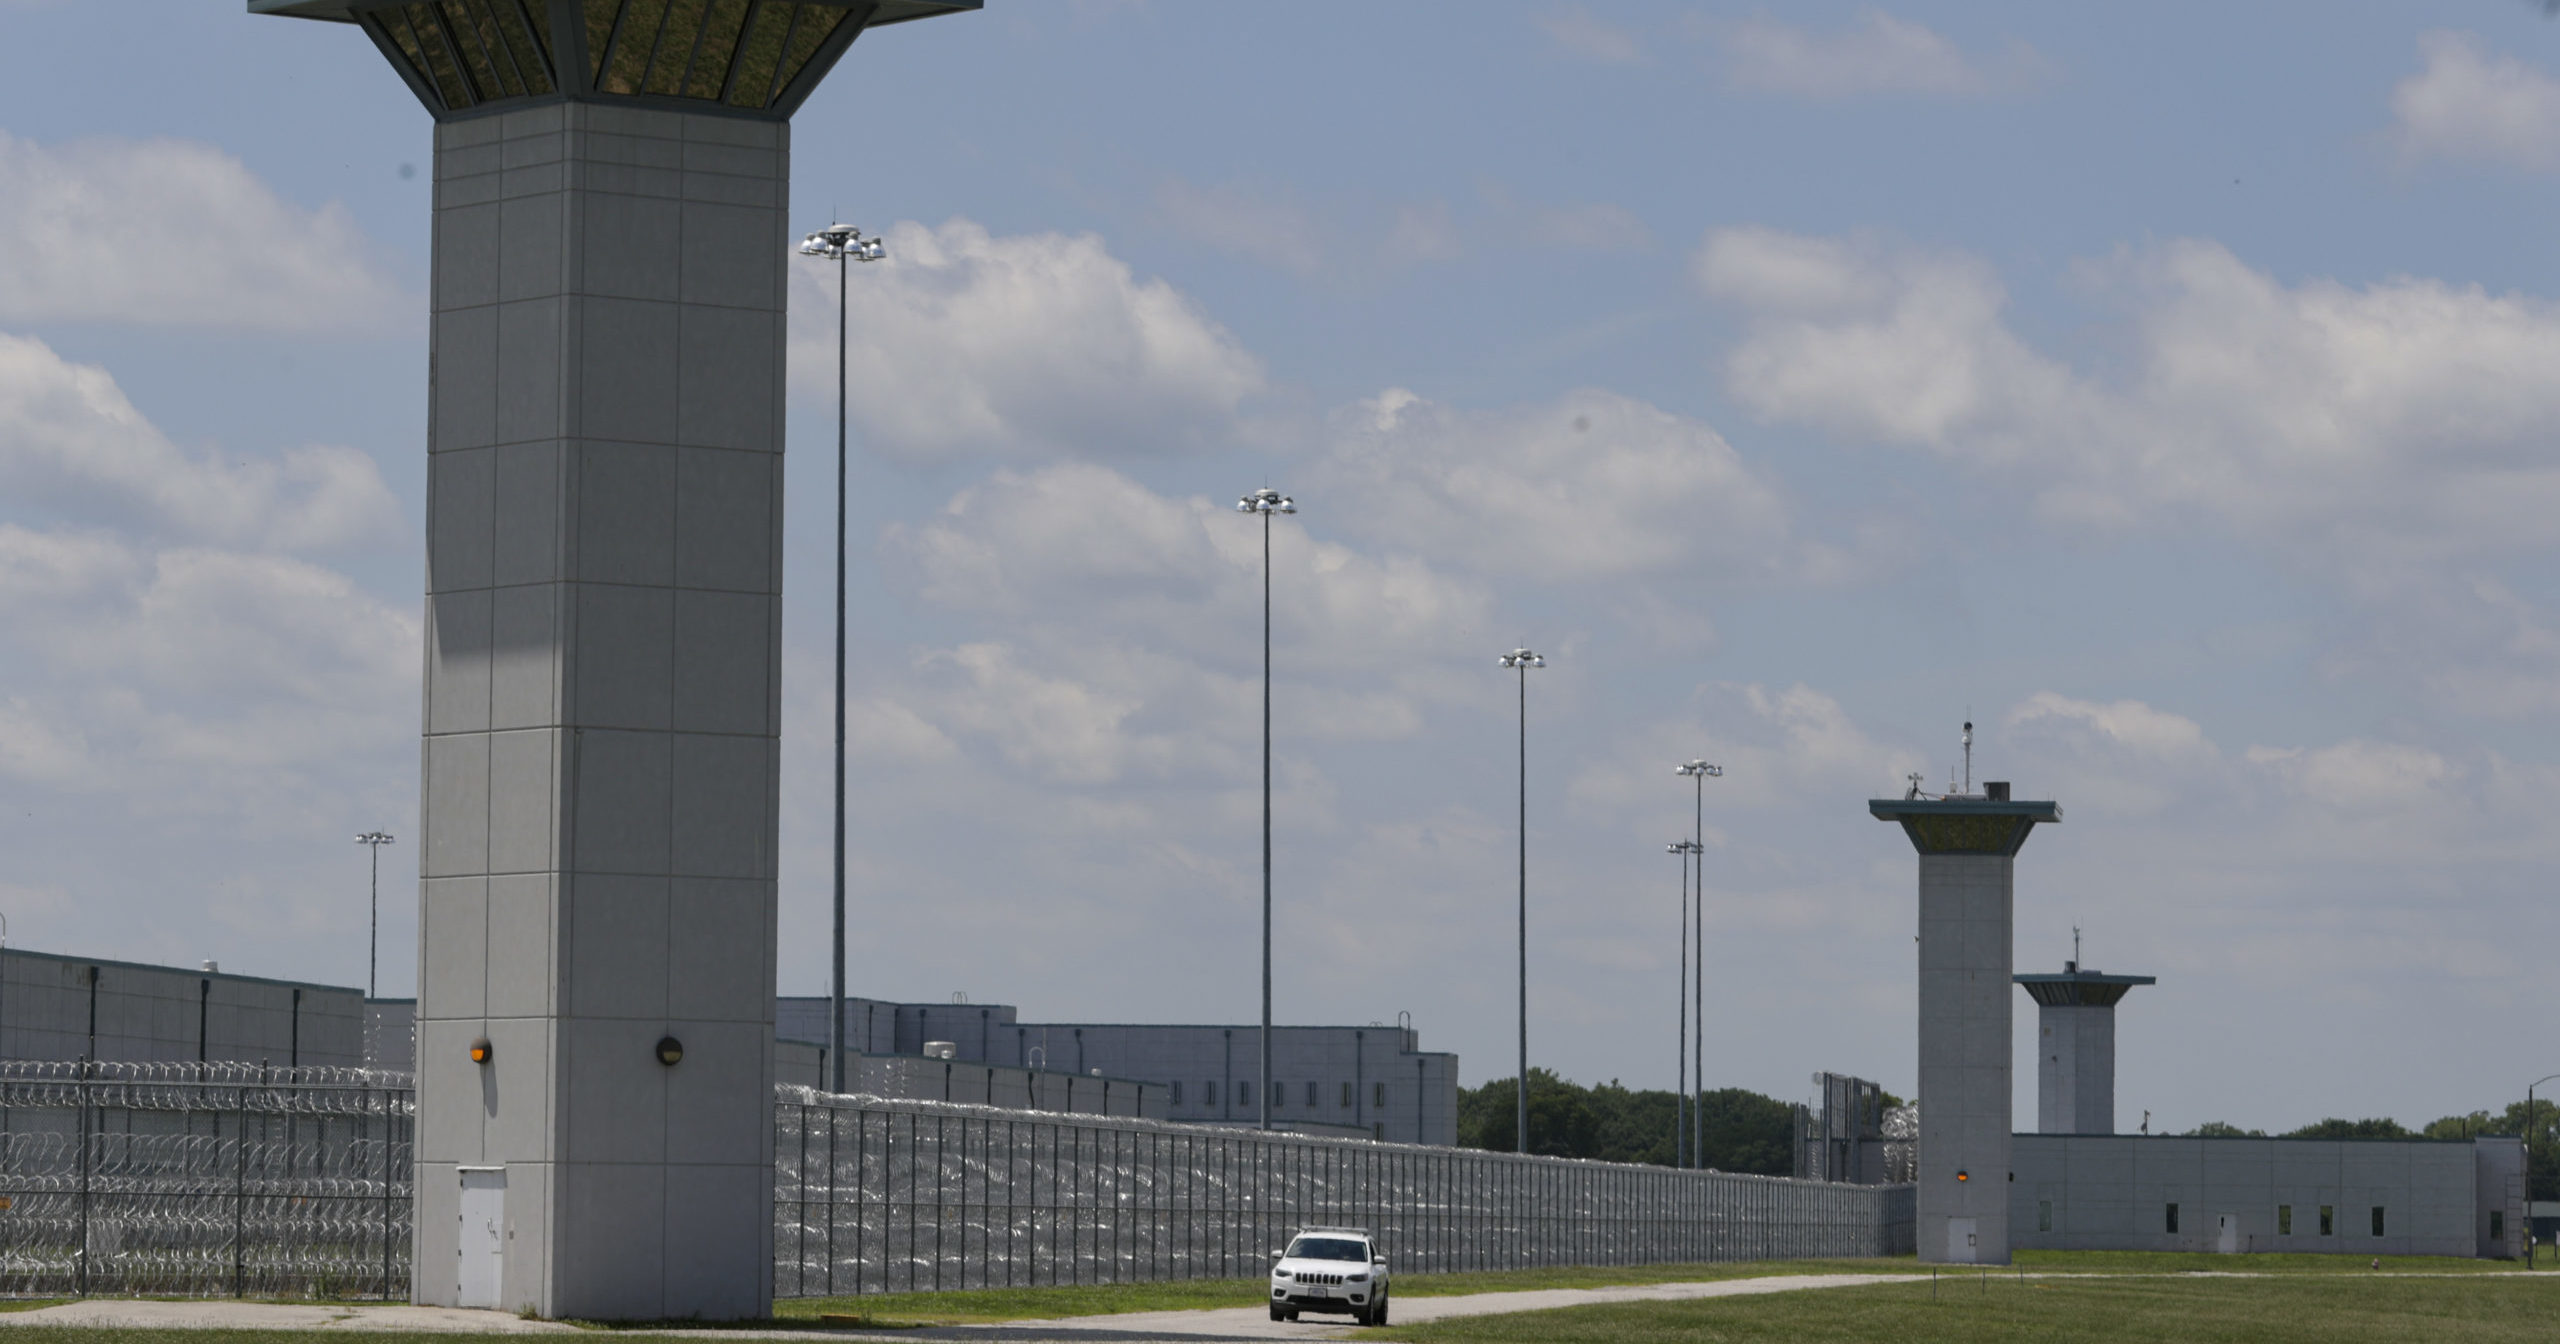 In this July 17, 2020, file photo, the federal prison complex in Terre Haute, Indiana, is shown. The Justice Department scheduled two additional federal executions on July 31, an announcement that comes weeks after it fought off last-minute legal challenges and successfully resumed federal executions following a 17-year pause.